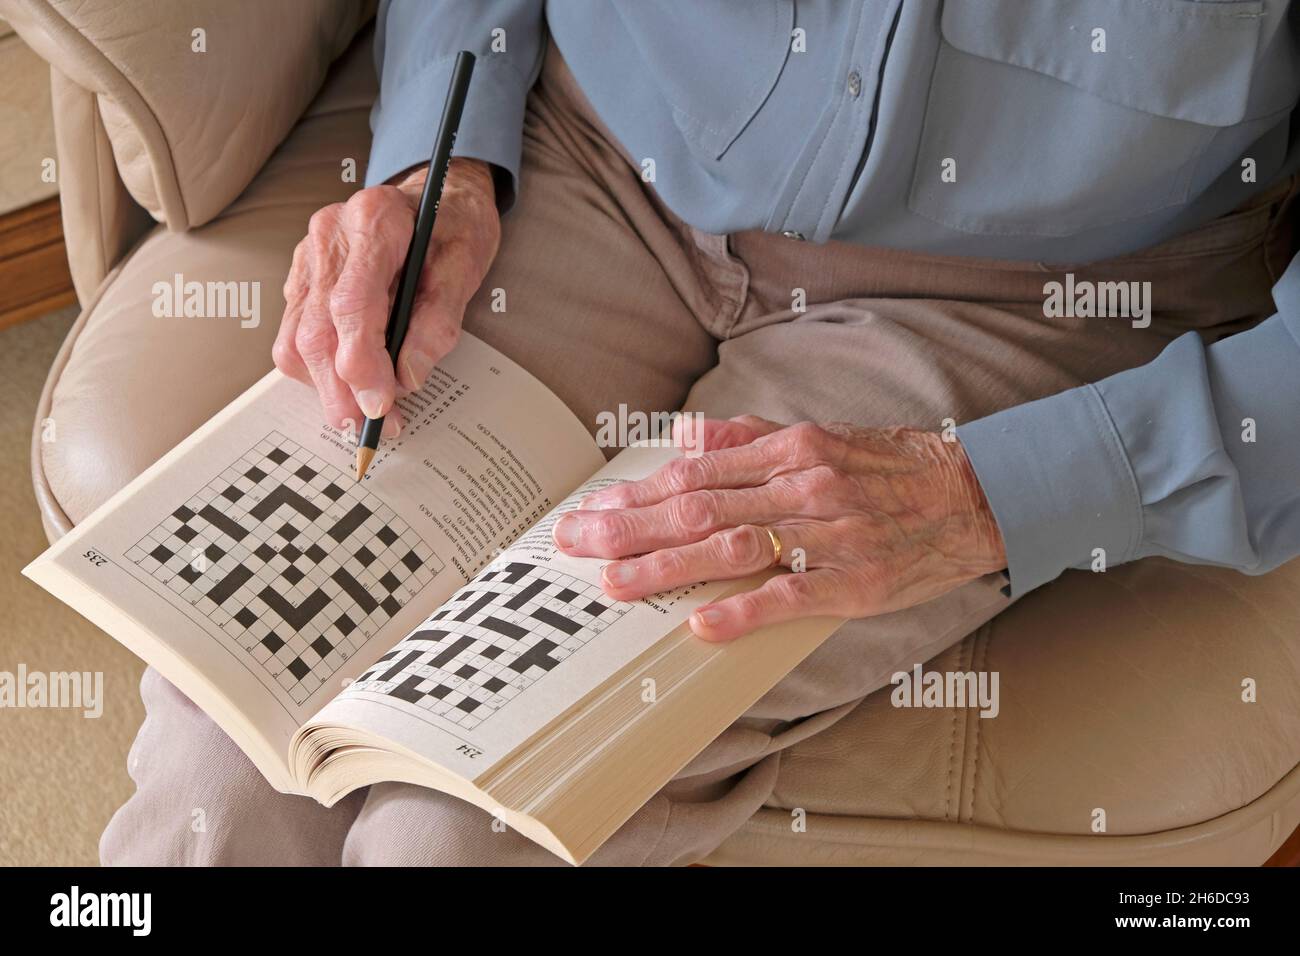 Hands of a Senior lady doing a crossword puzzle Stock Photo